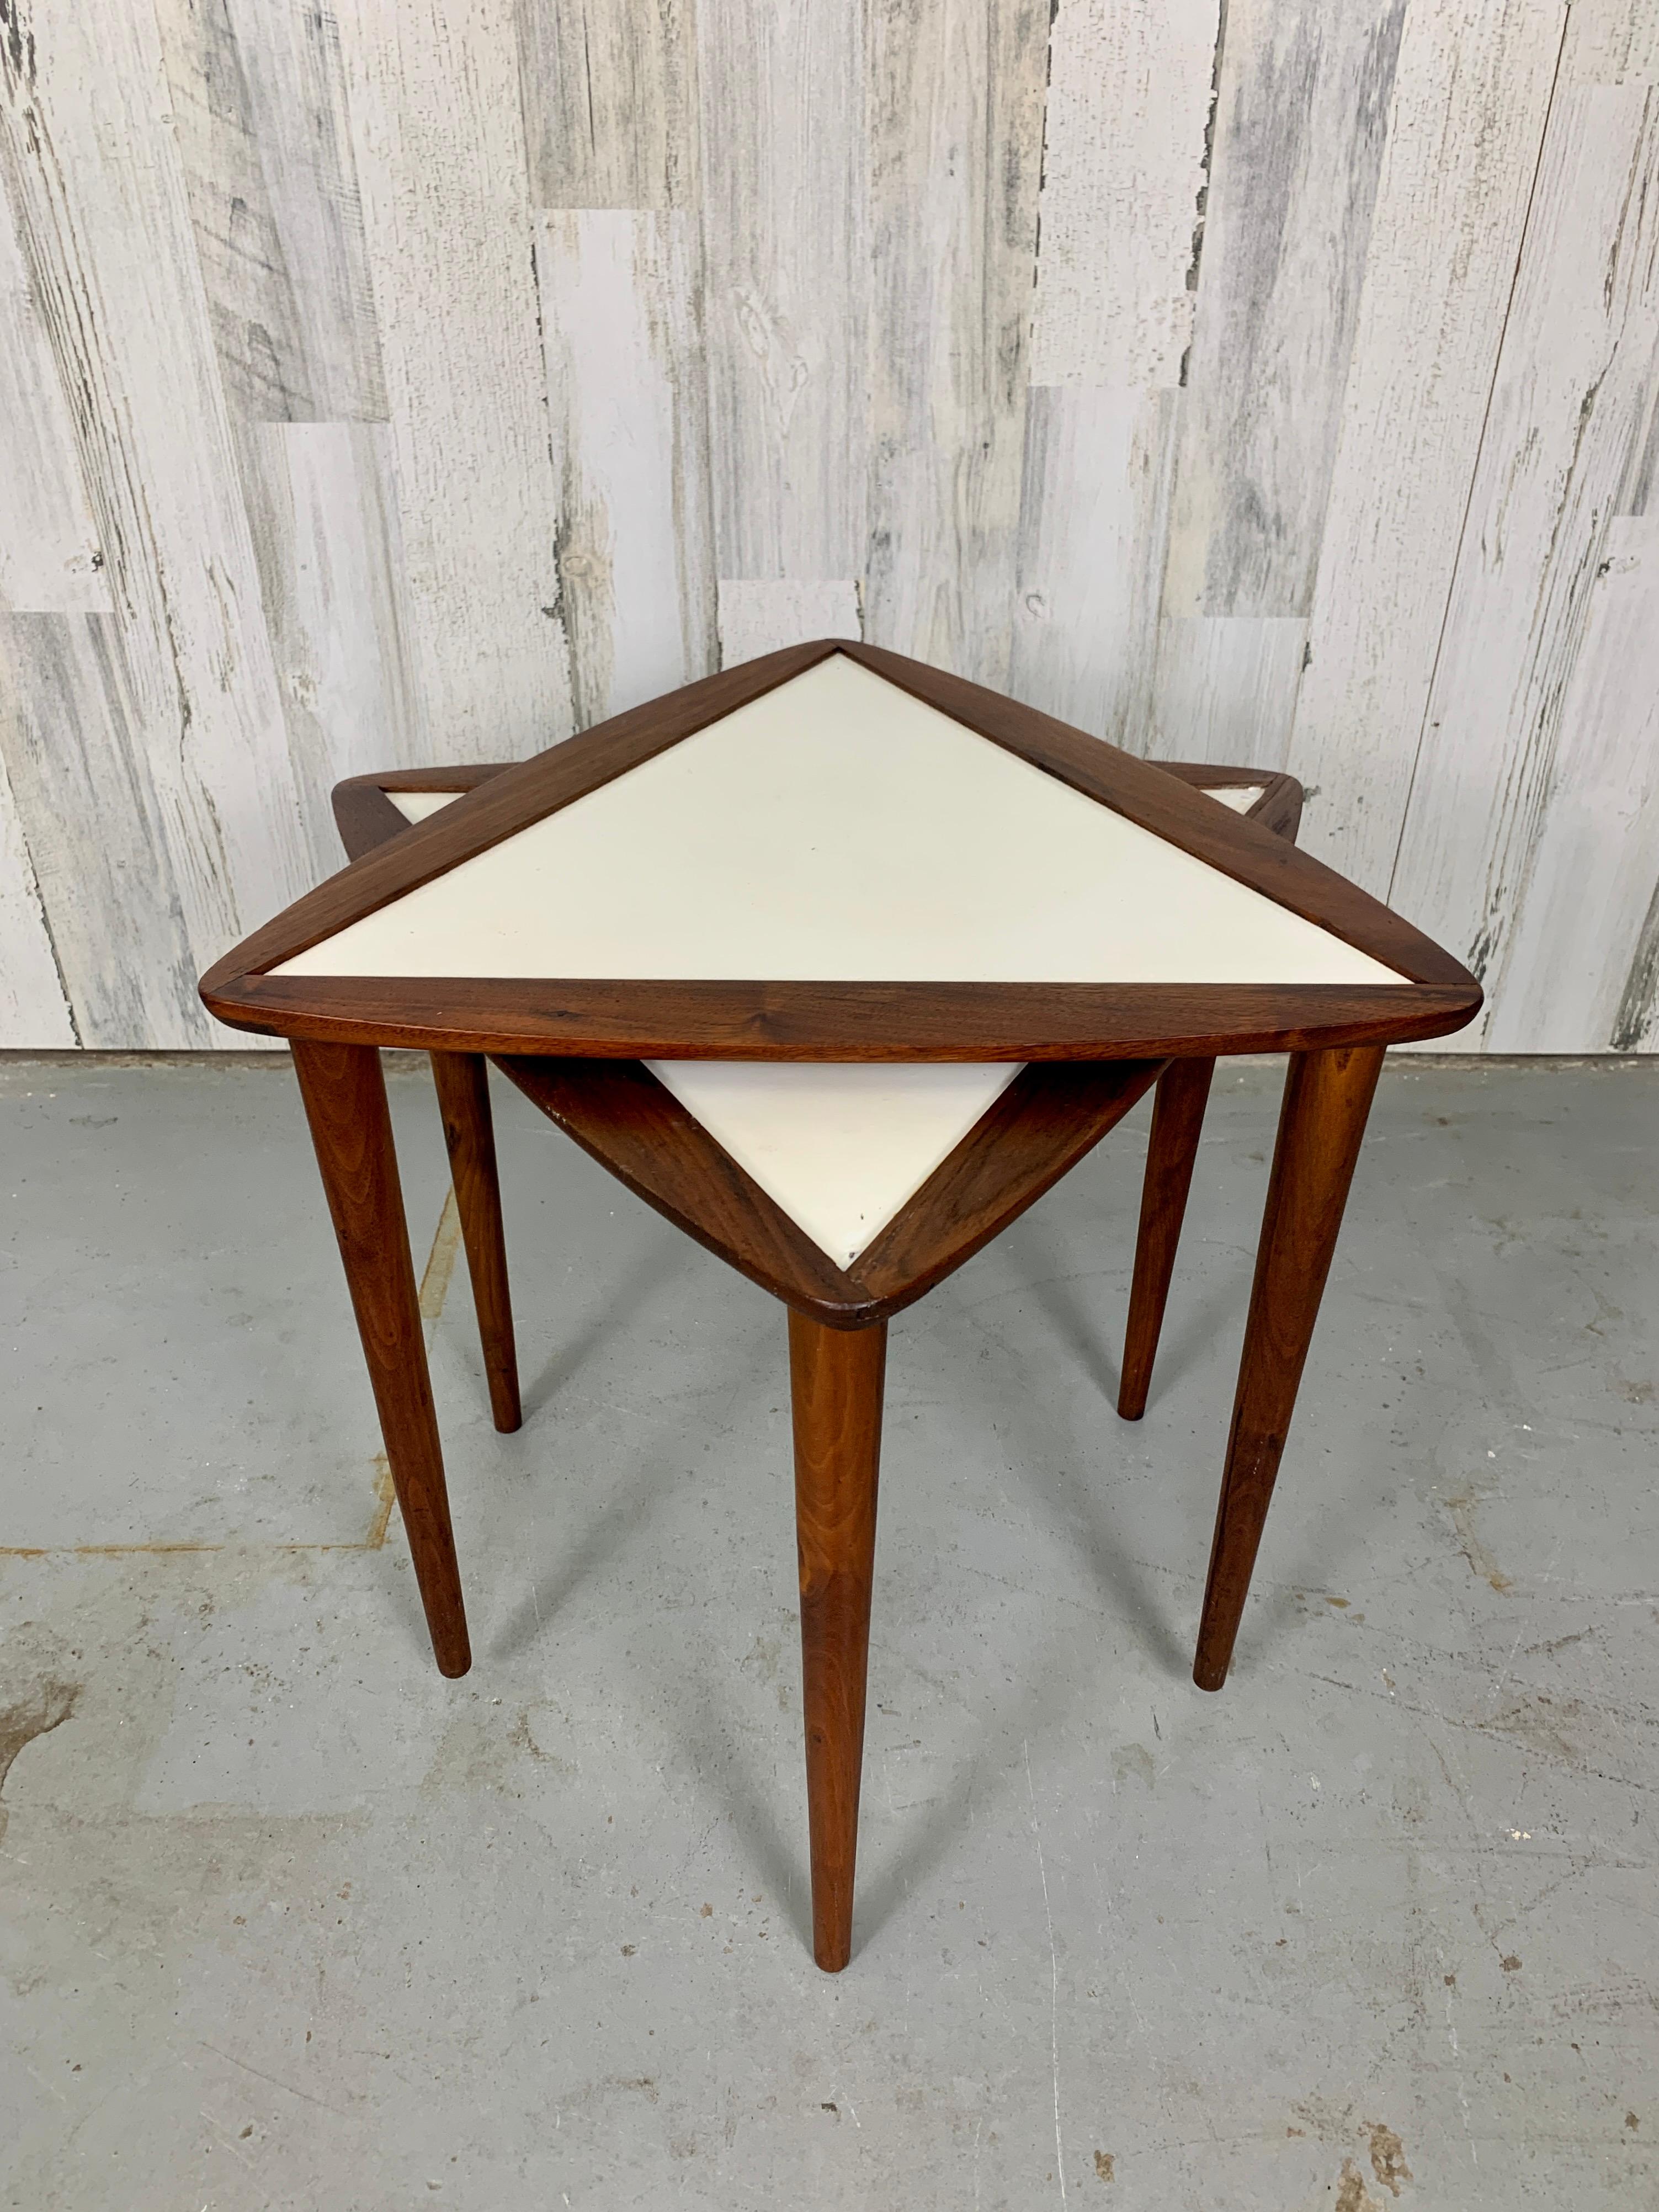 A pair of stacking drinks tables in triangle shaped design.
Walnut with white masonite tops.